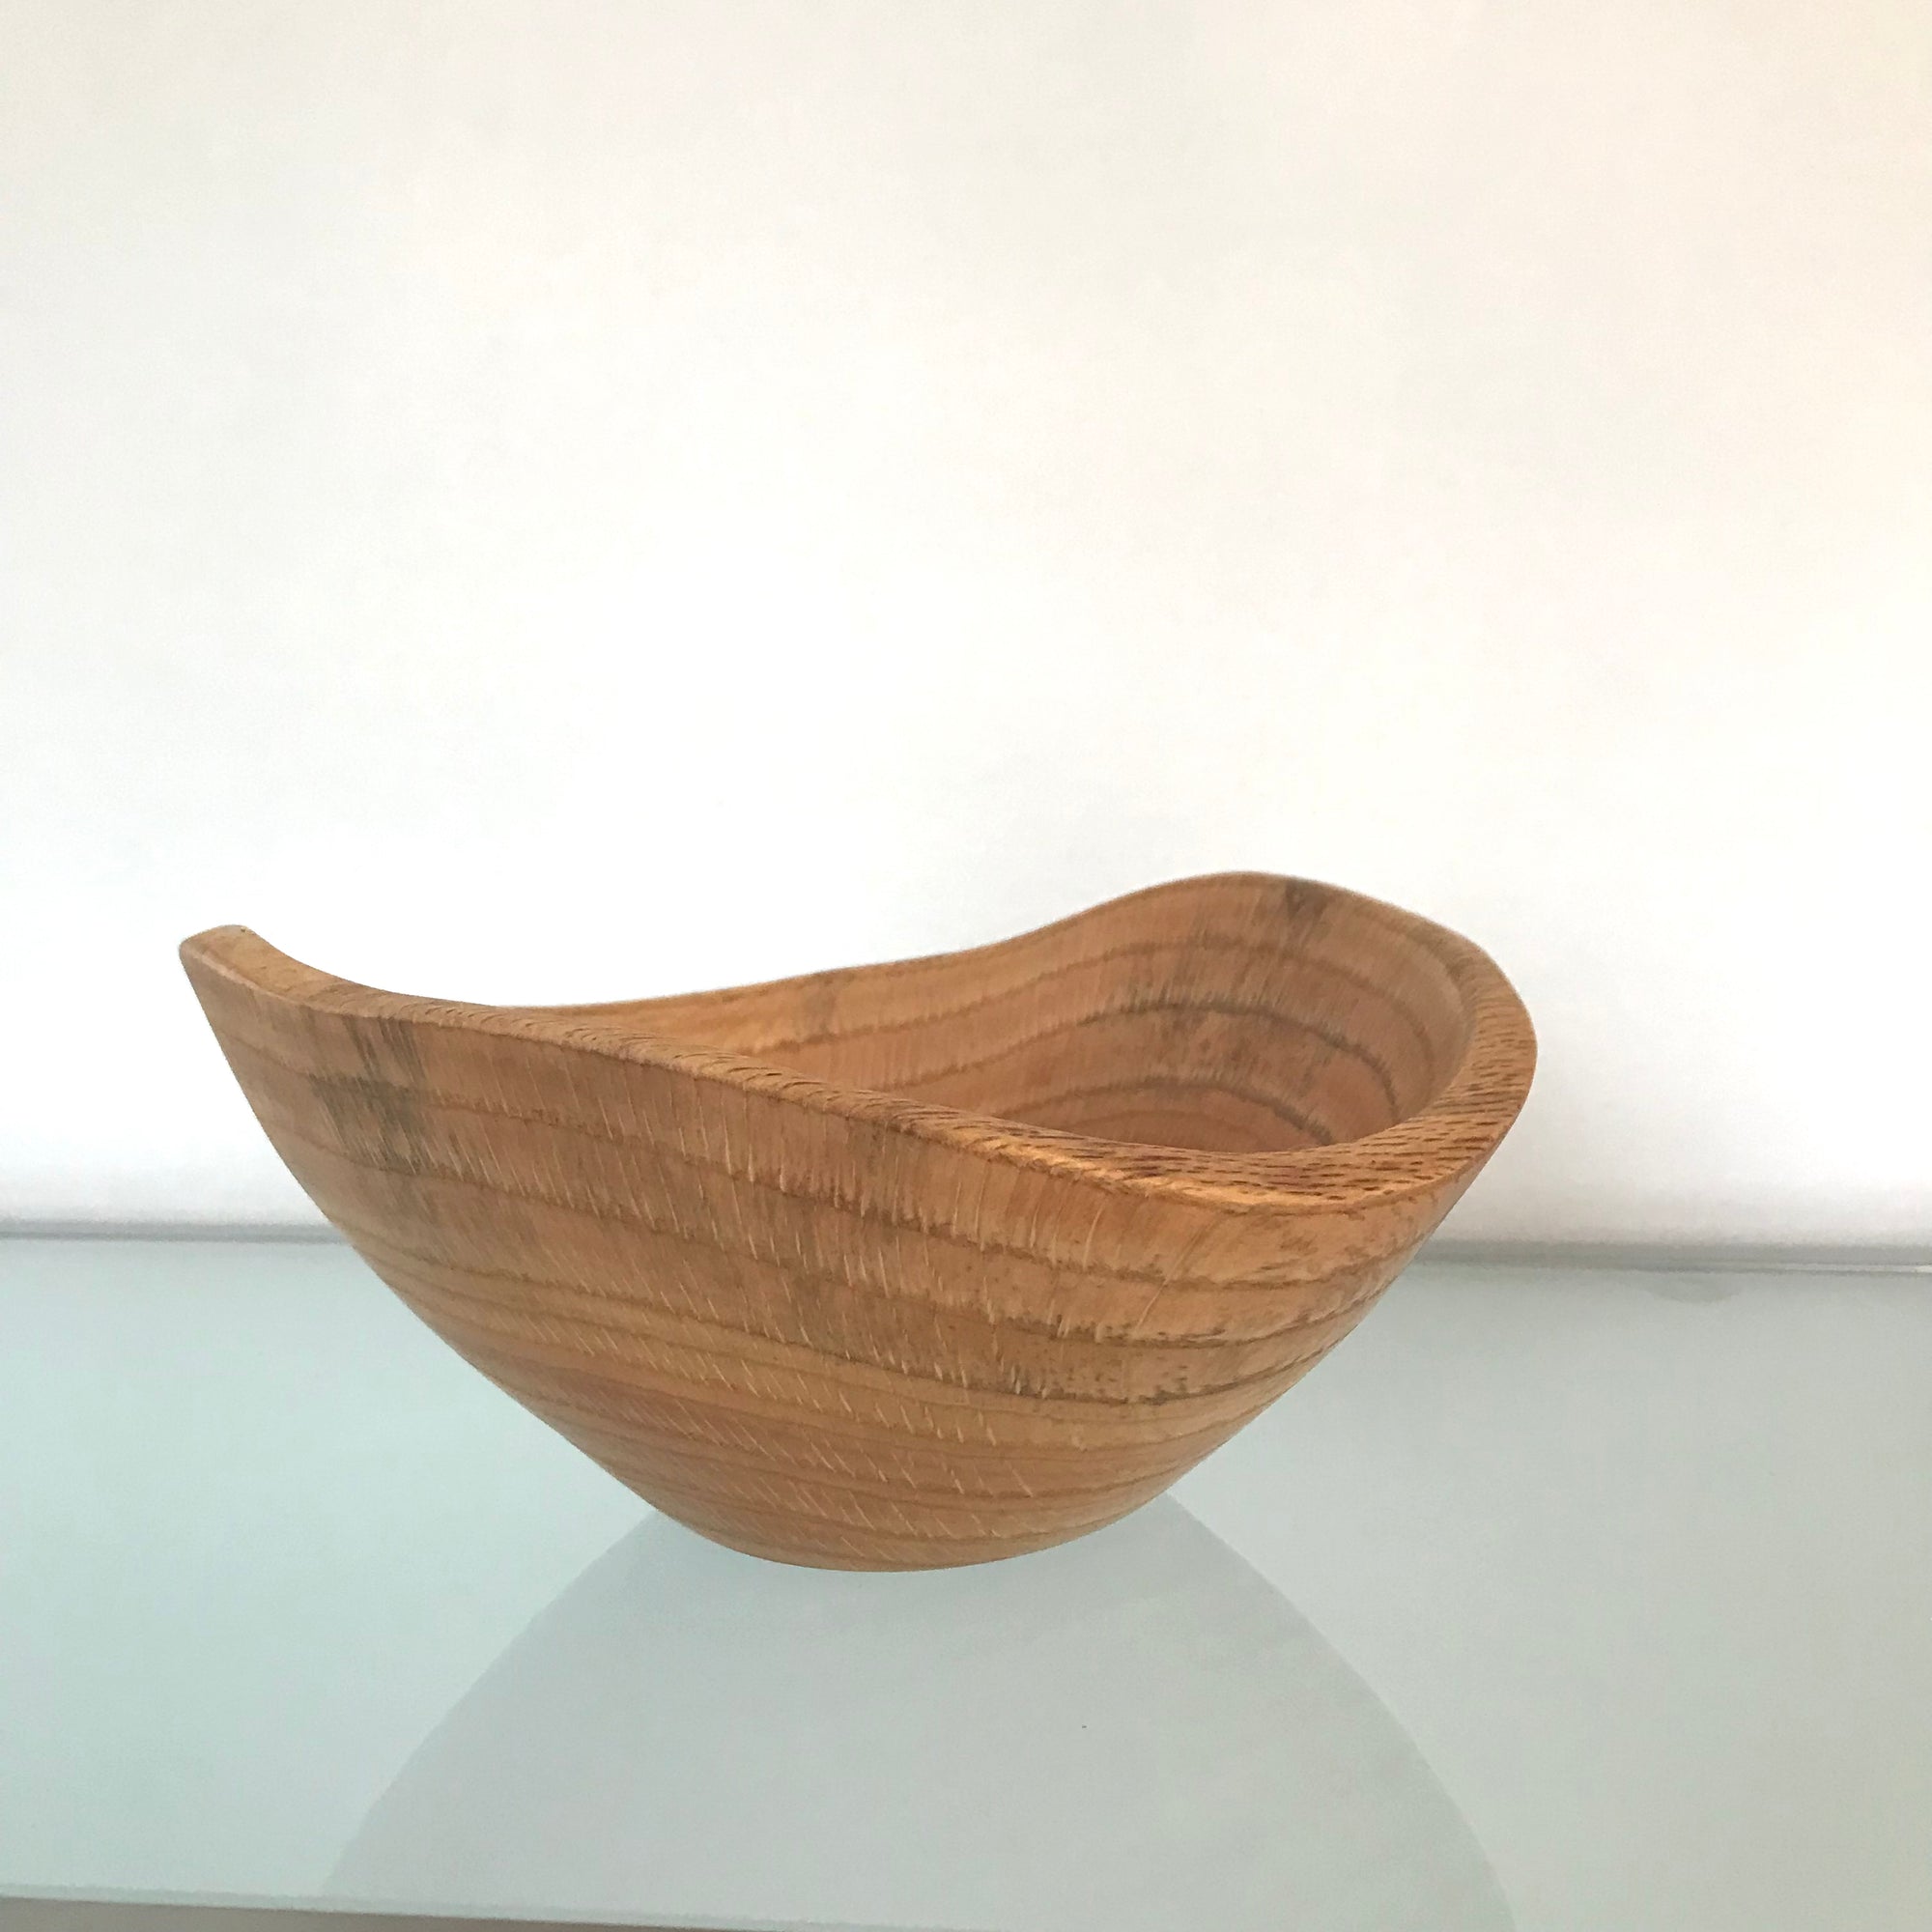 Richard Porter - Wood - Med Bowls and Wood Workings (various)